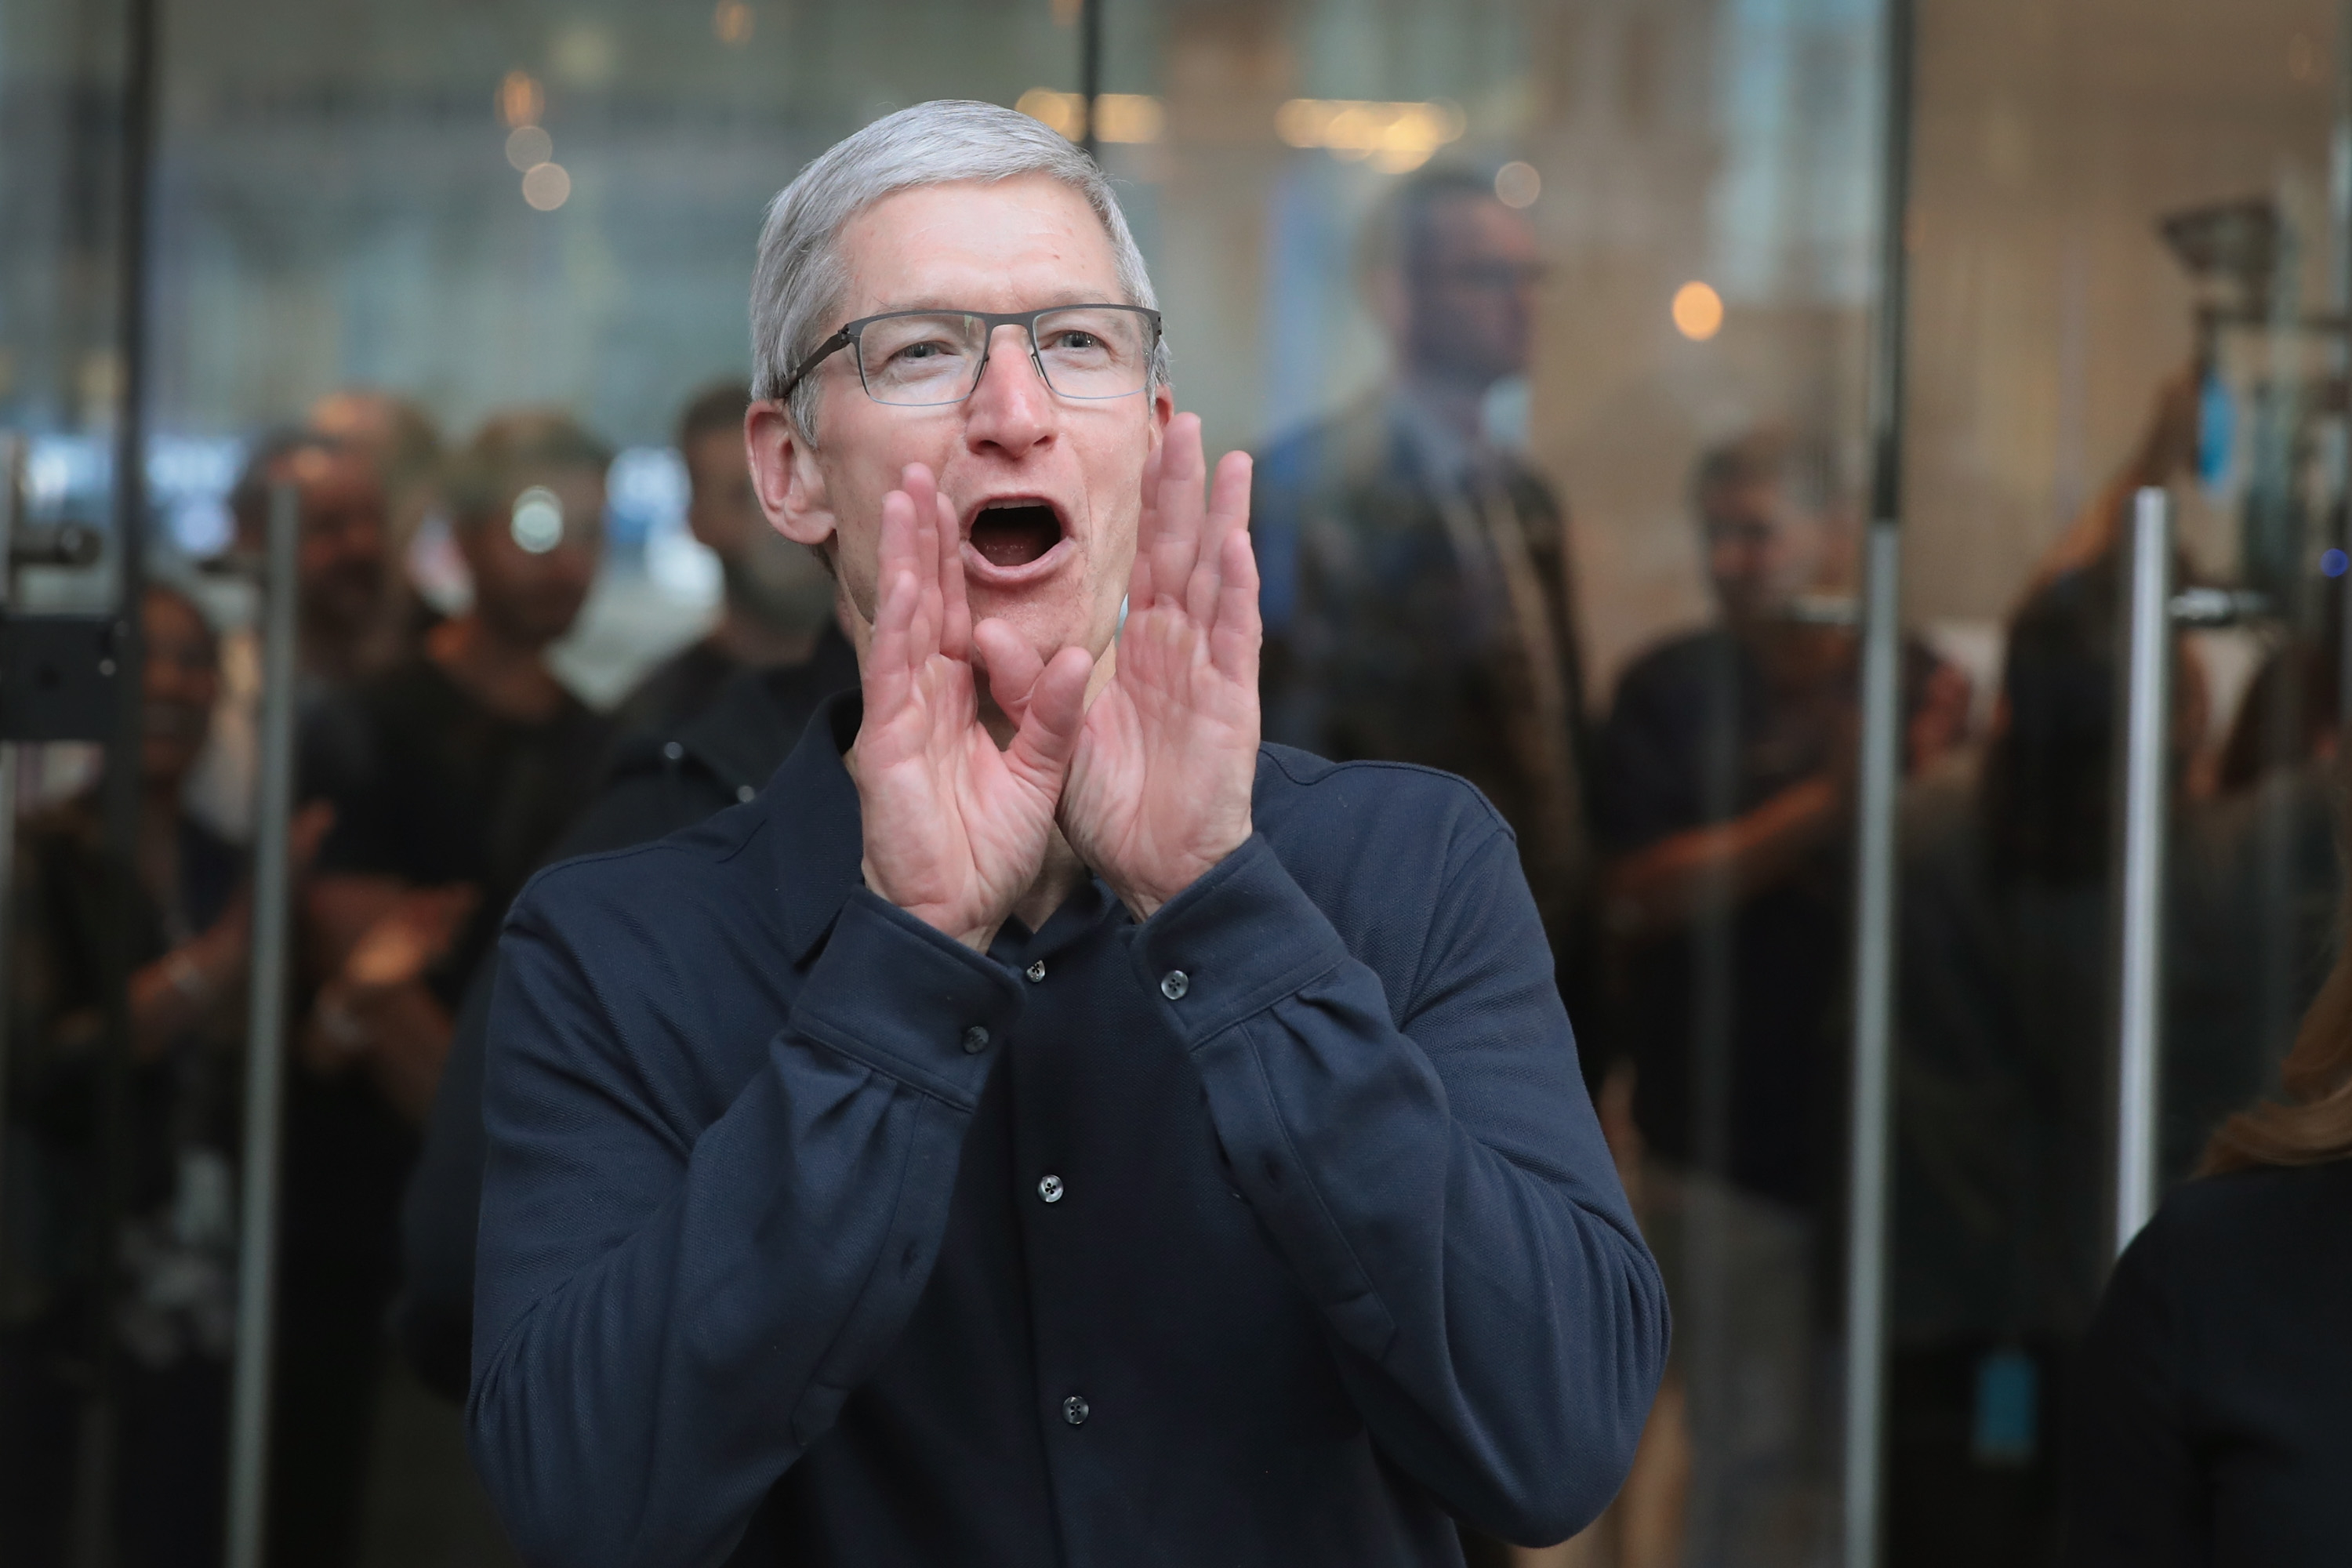 Apple CEO Tim Cook greets guests at the grand opening of Apple's Chicago flagship store on Michigan Avenue October 20, 2017 in Chicago, Illinois. (Scott Olson&mdash;Getty Images)